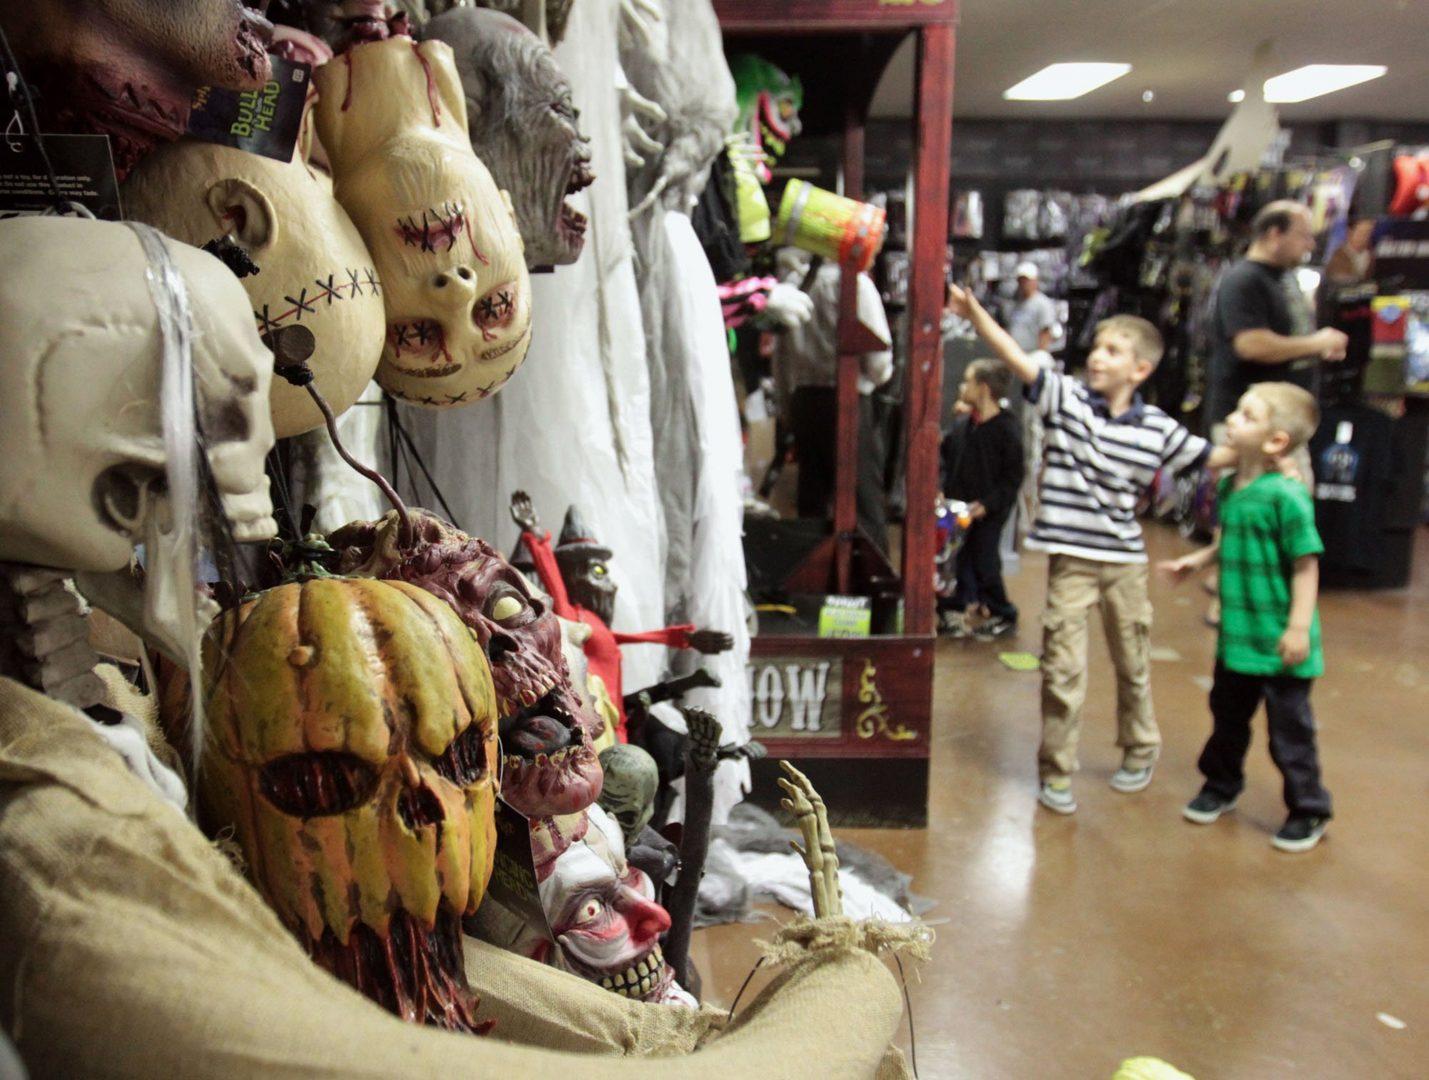 Connor Bartholomew, 8, and his brother, Miles, 5, right, enjoy holiday-themed displays at Spirit Halloween in Biloxi, Mississippi, on Wednesday, October 23, 2013. (John Fitzhugh/Biloxi Sun Herald/MCT)
